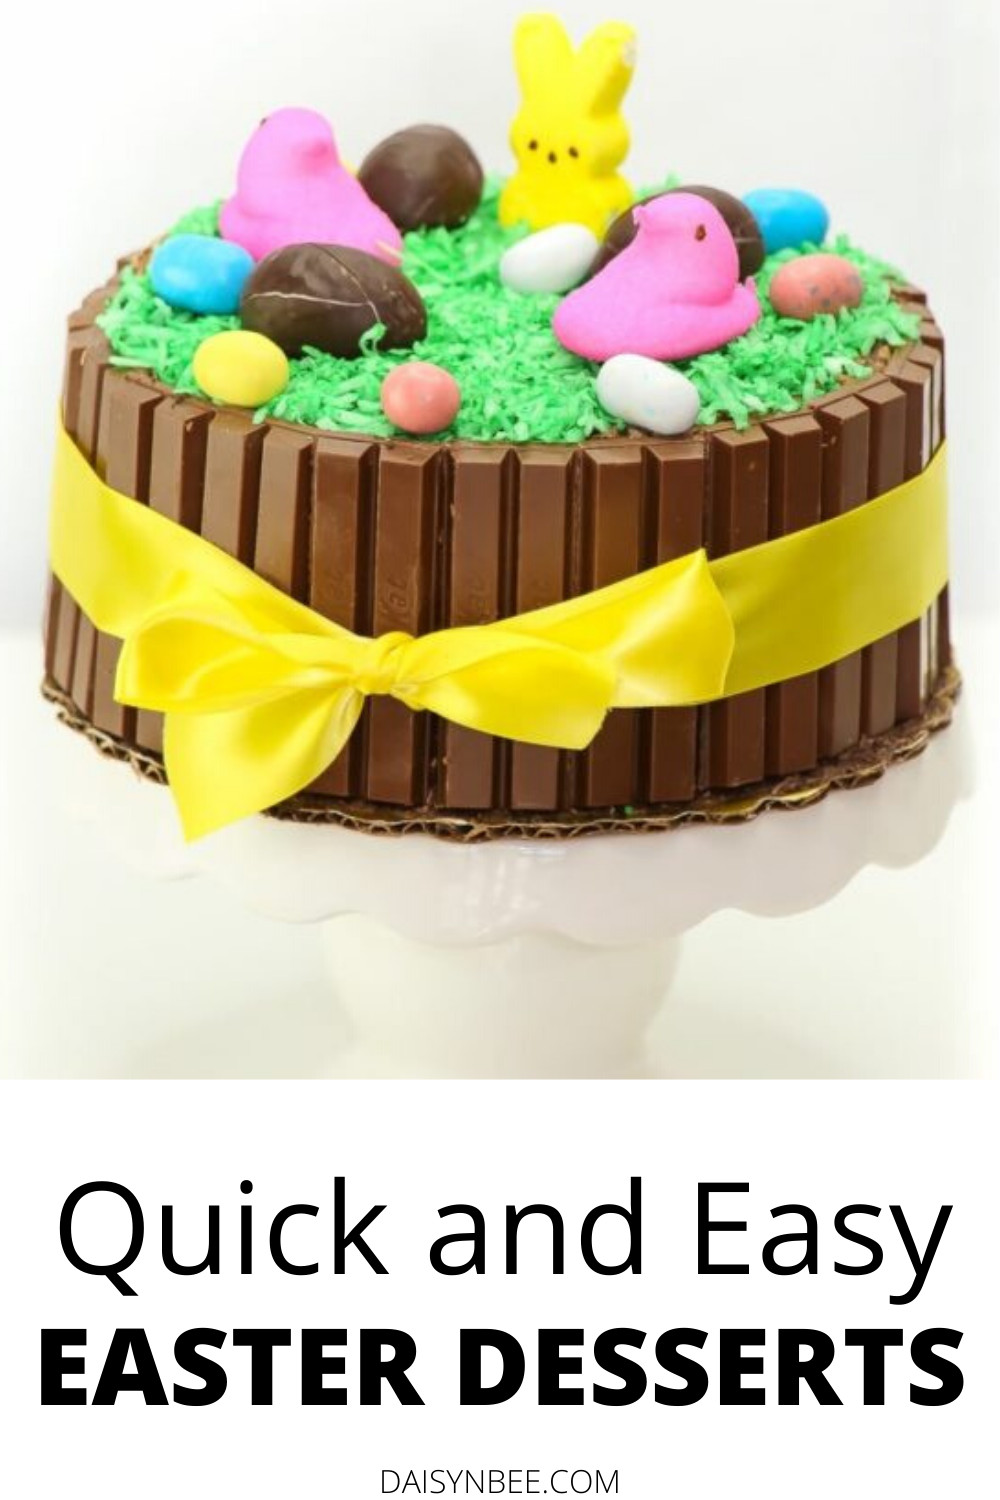 Quick And Easy Easter Desserts
 Quick and Easy Easter Dessert Recipes in 2020